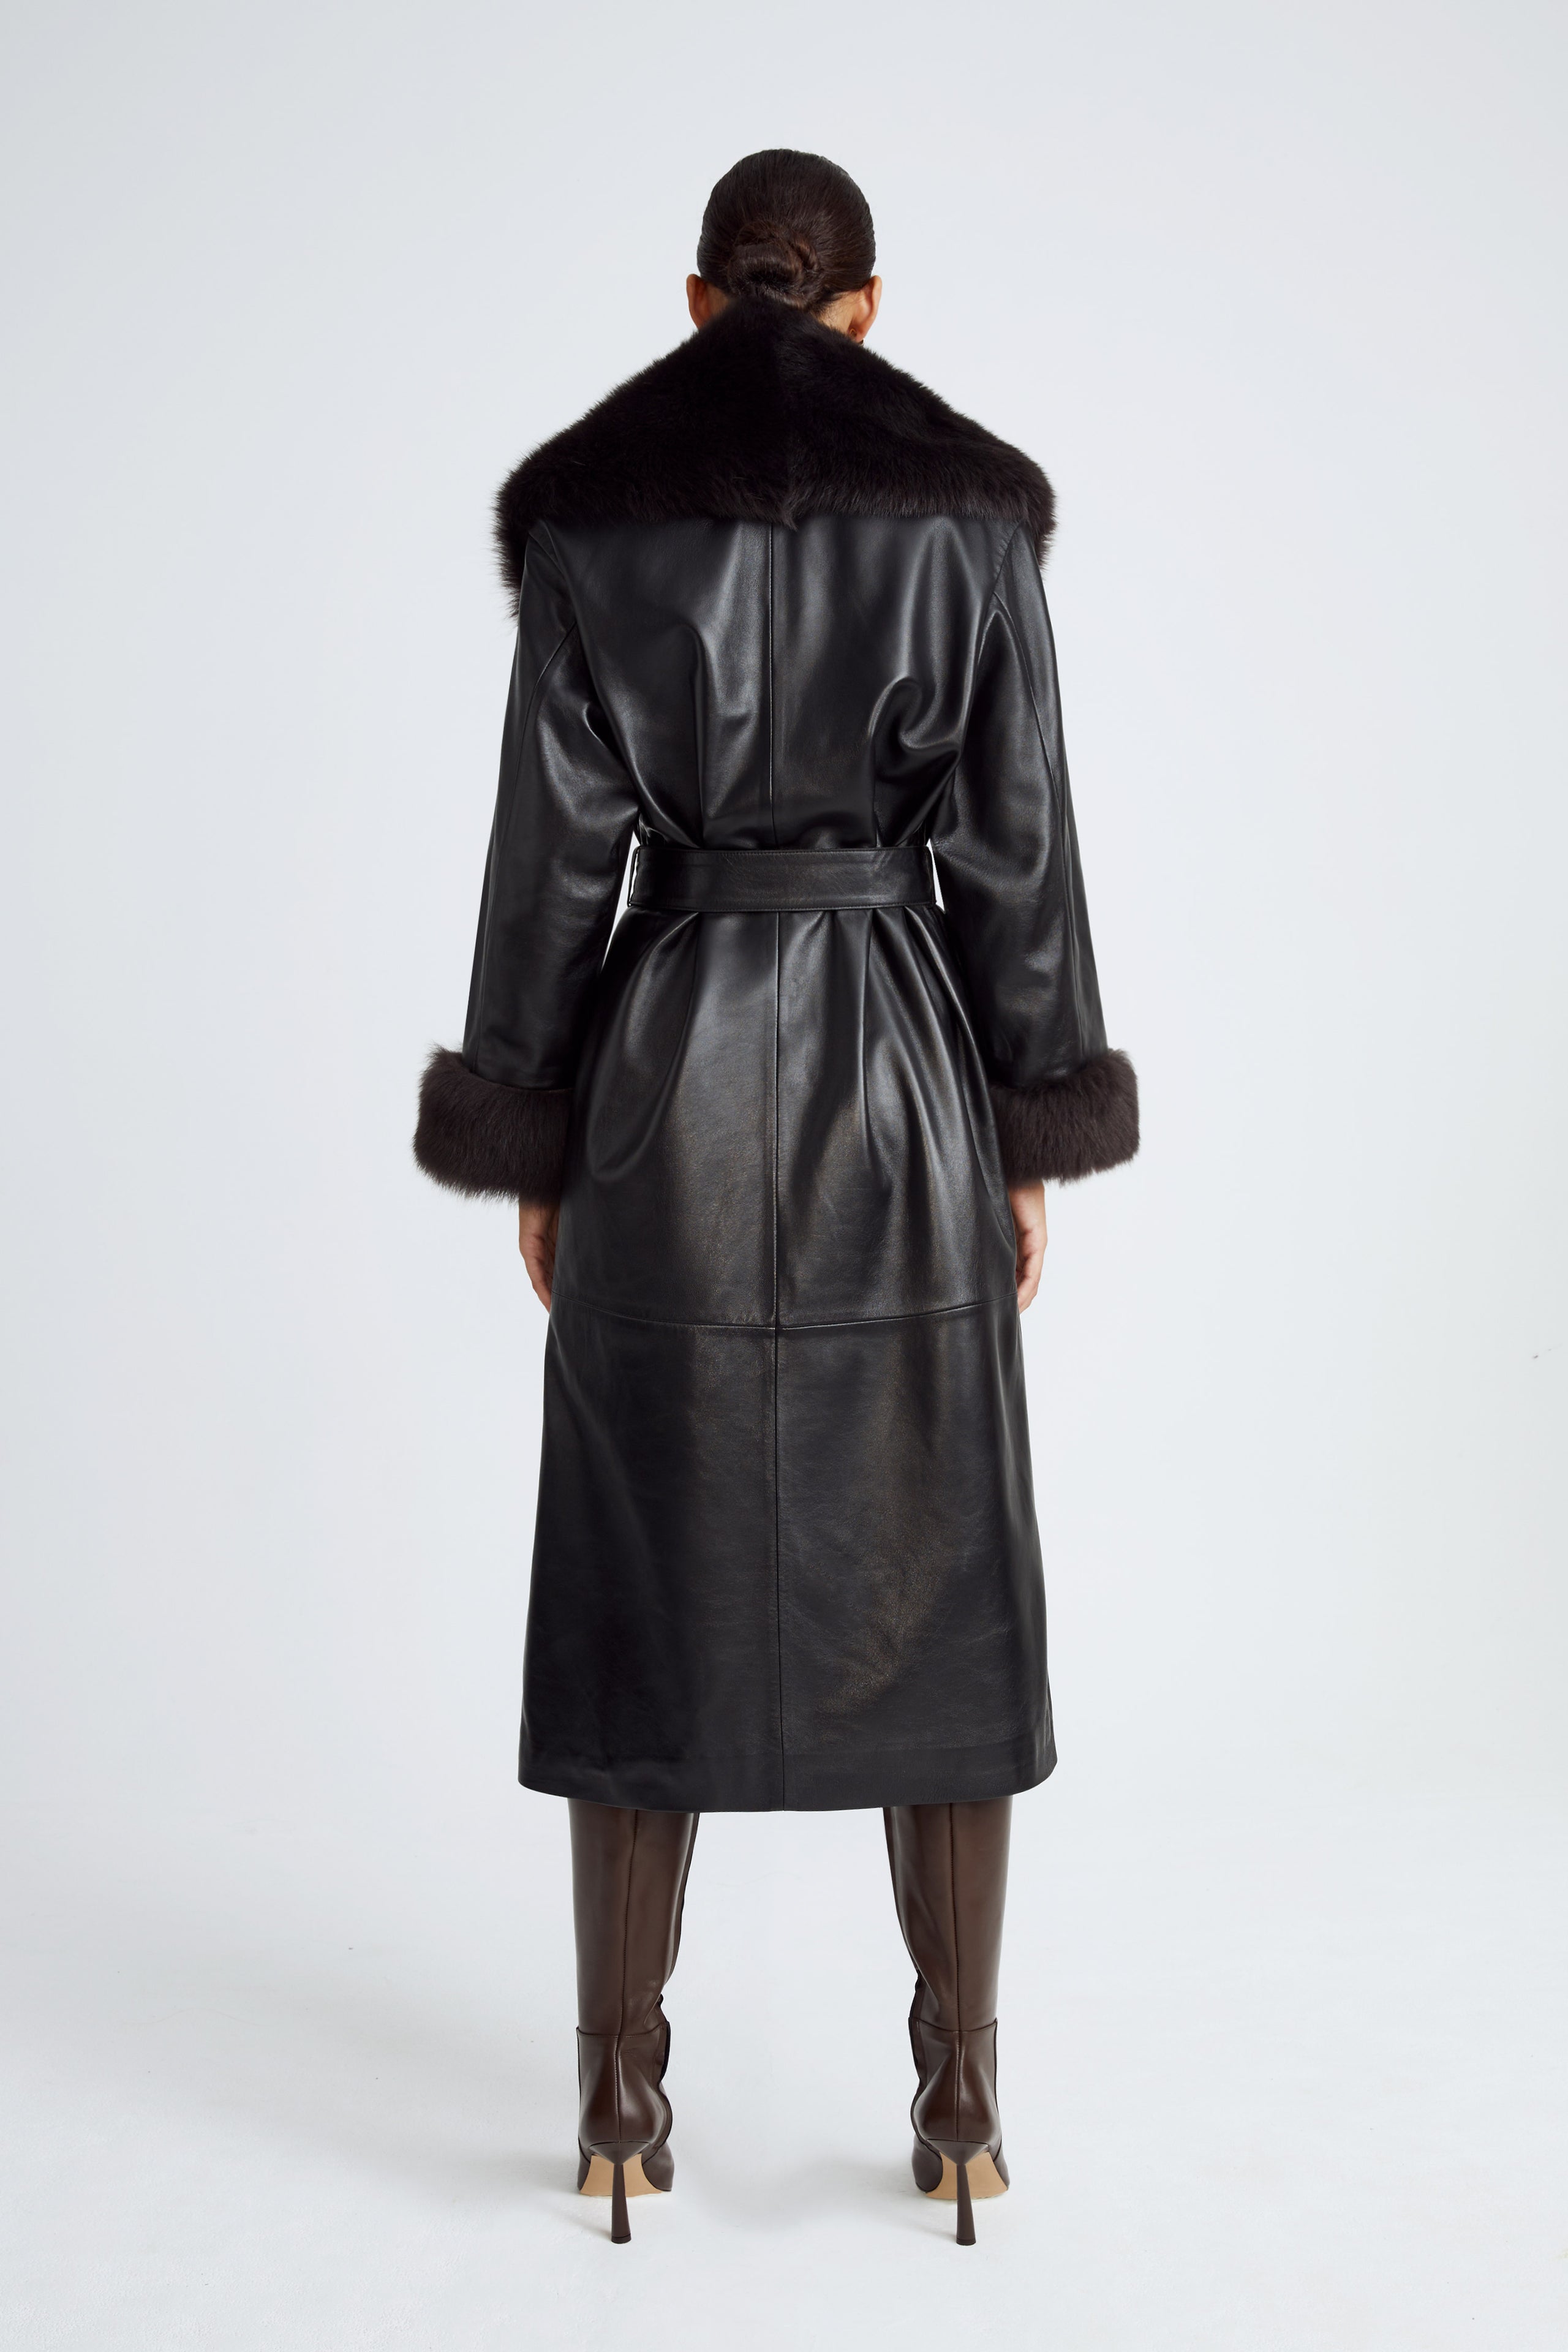 Model is wearing the Freja Black Espresso Luxurious Leather Trench Back